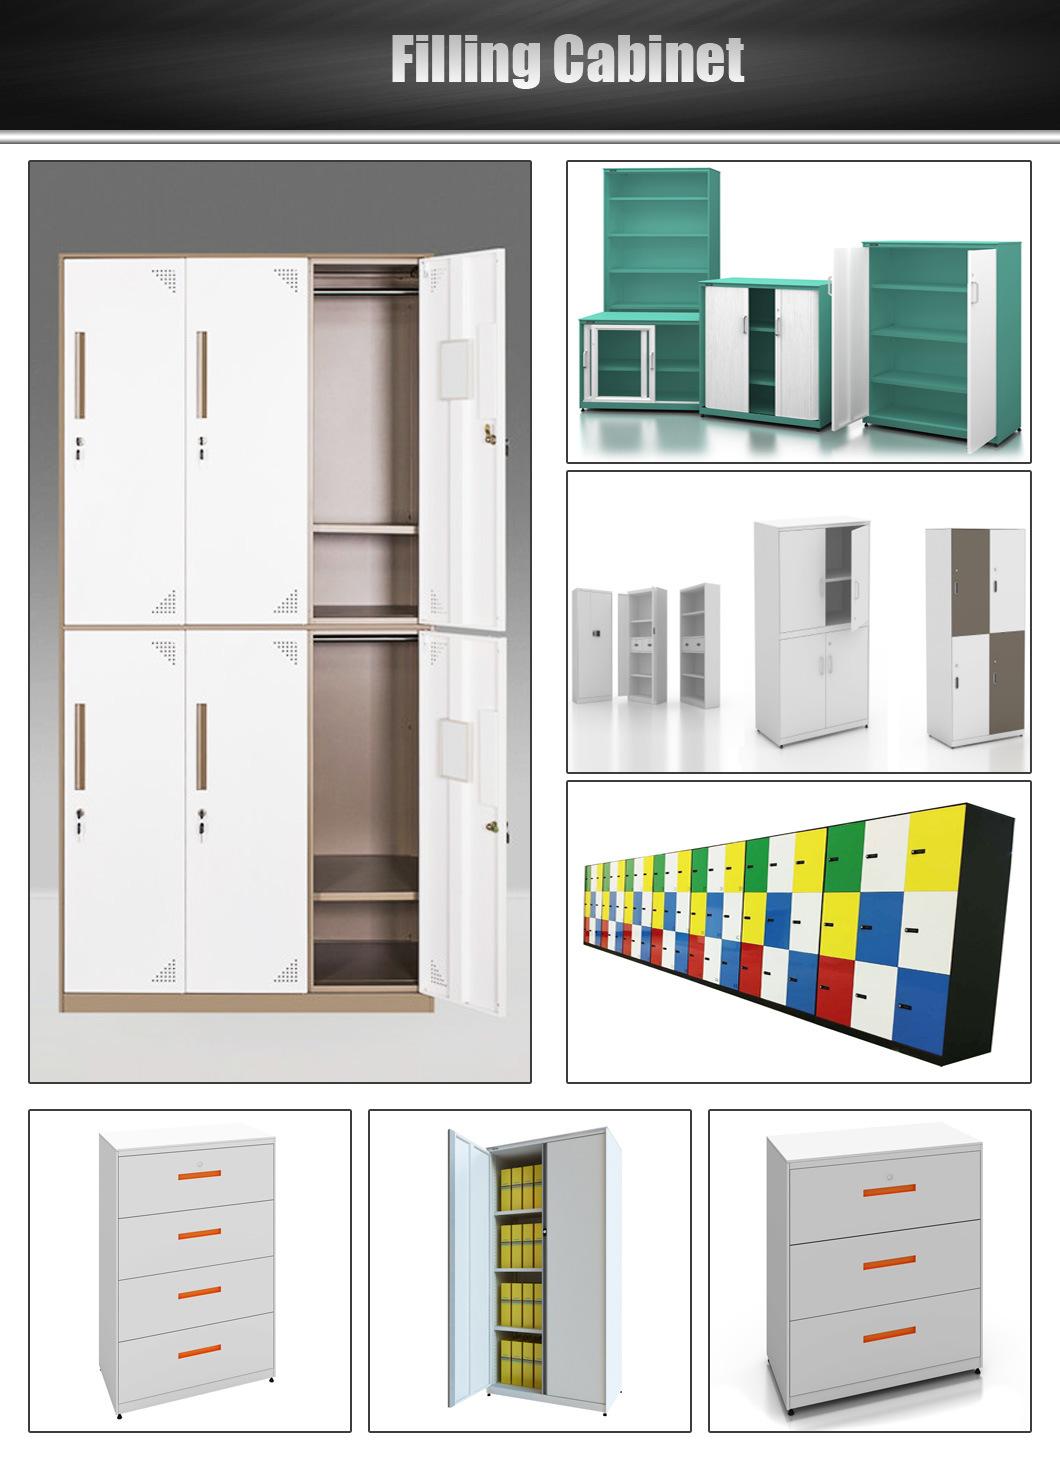 Outstanding Features Work Storage Cabinets with Environmentally-Friendly Materials